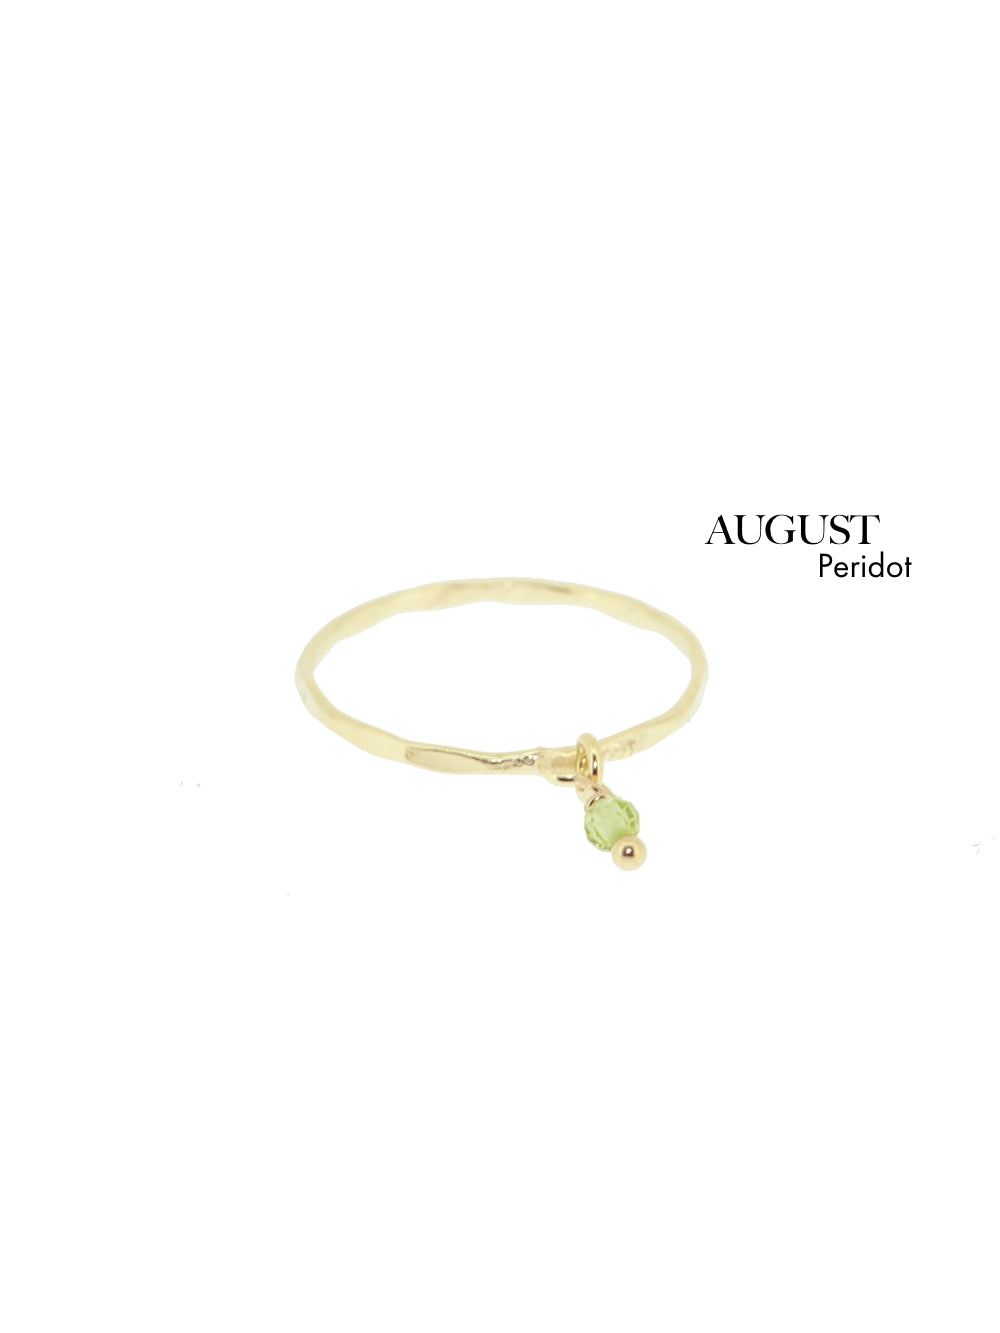 Birthstone ring August - Peridot | 14K Gold Plated